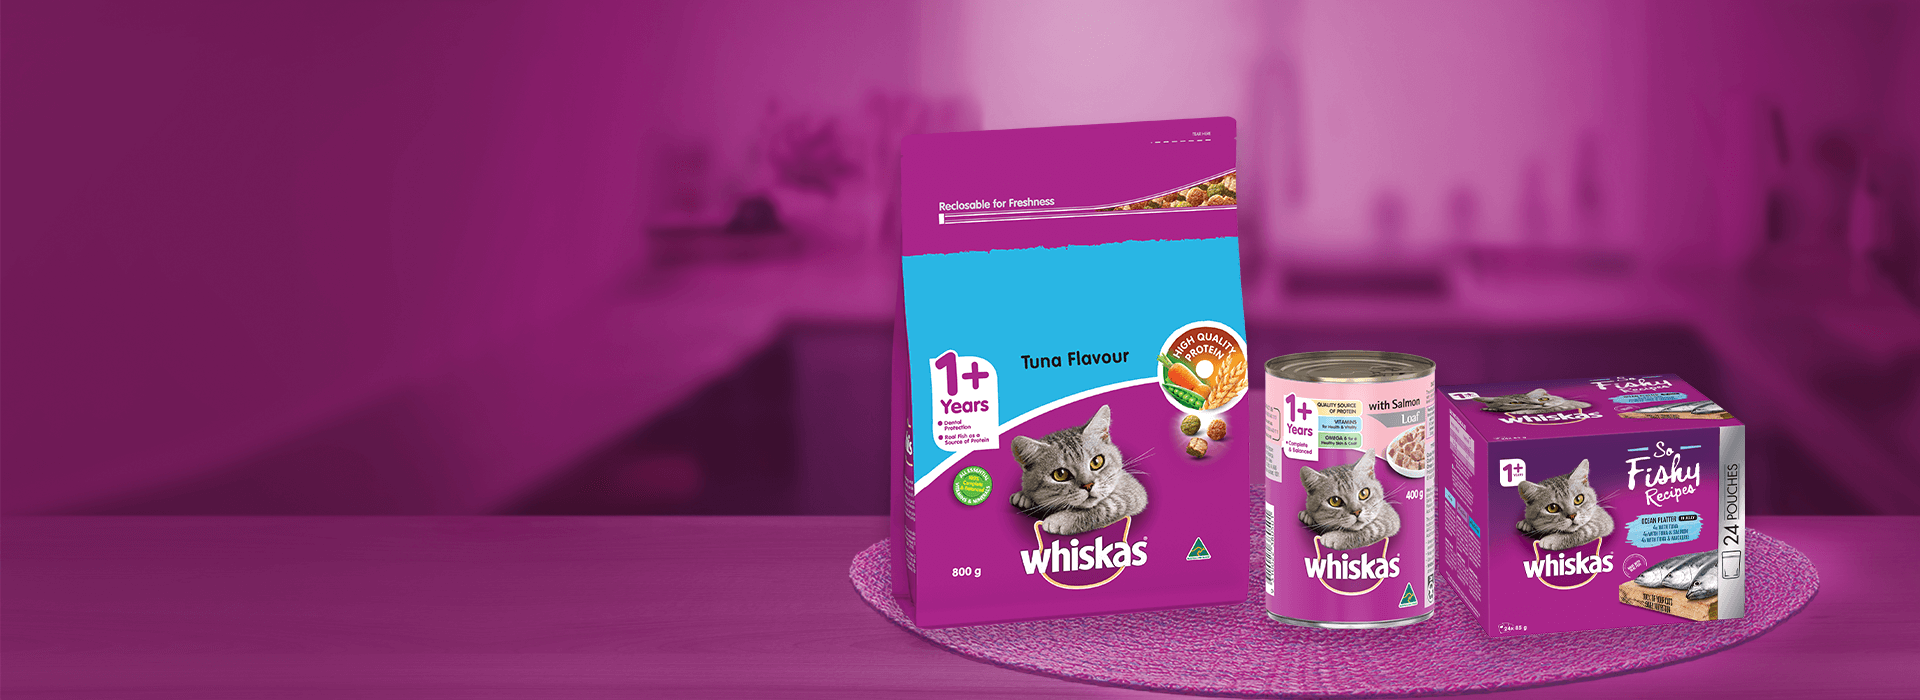 whiskas adult products hero image